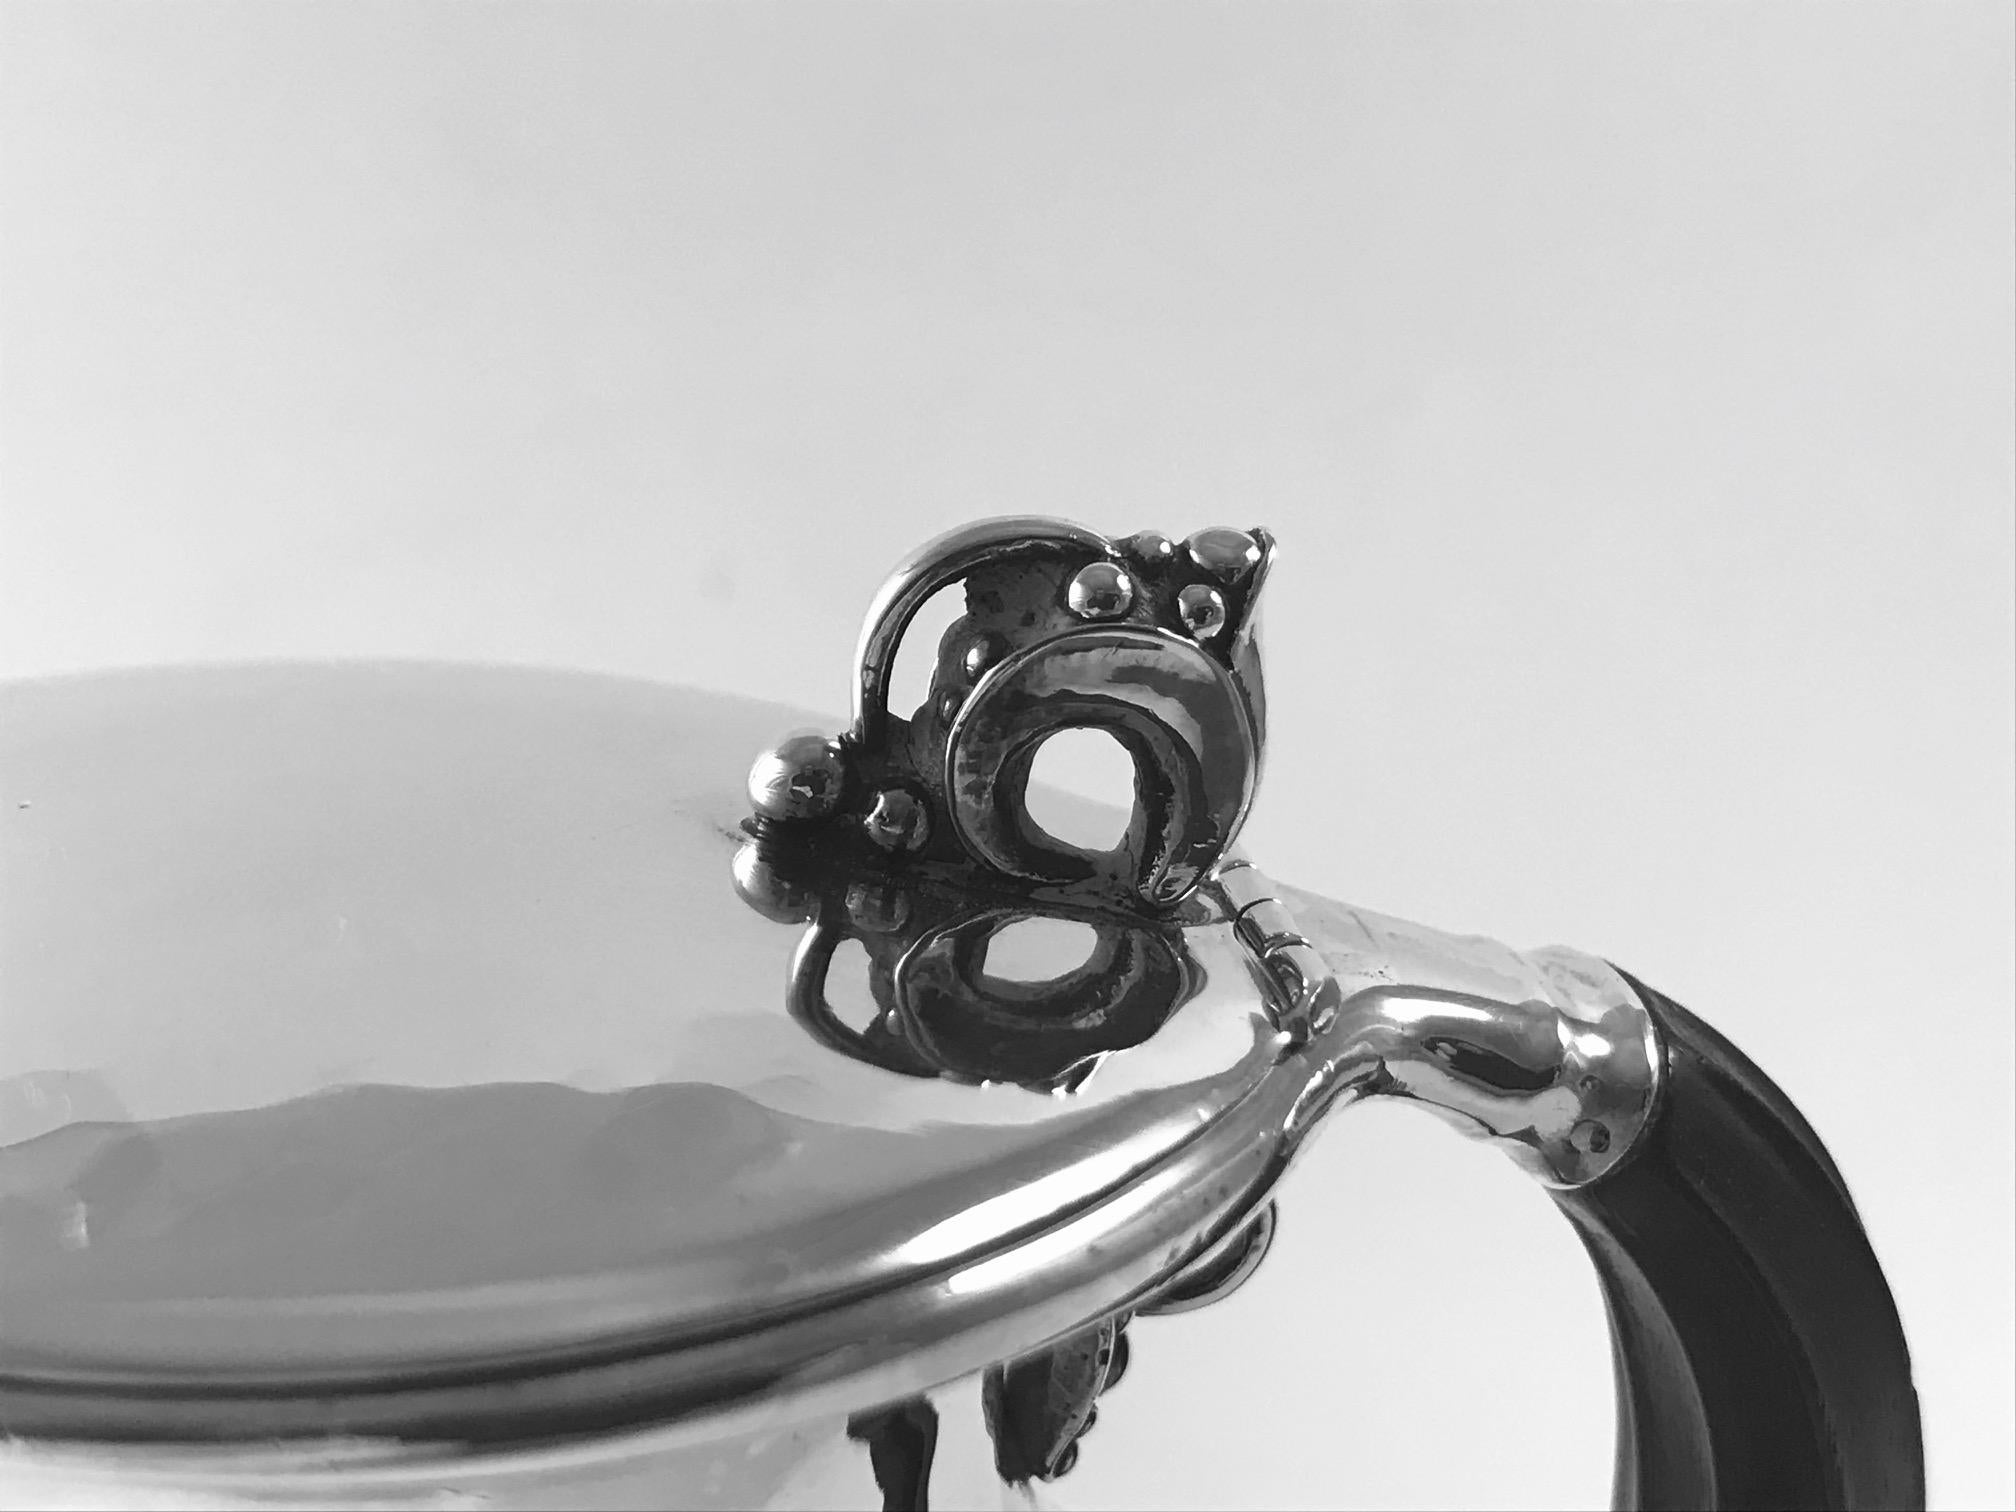 This is a rarely seen sterling silver Georg Jensen syrup jug with grape decorations on the hinged lid and under the ebony handle, design #385E by Jorgen Jensen, one of Georg Jensen’s sons.

Measures: 4 1/4? (10.5cm) in height to the top of the